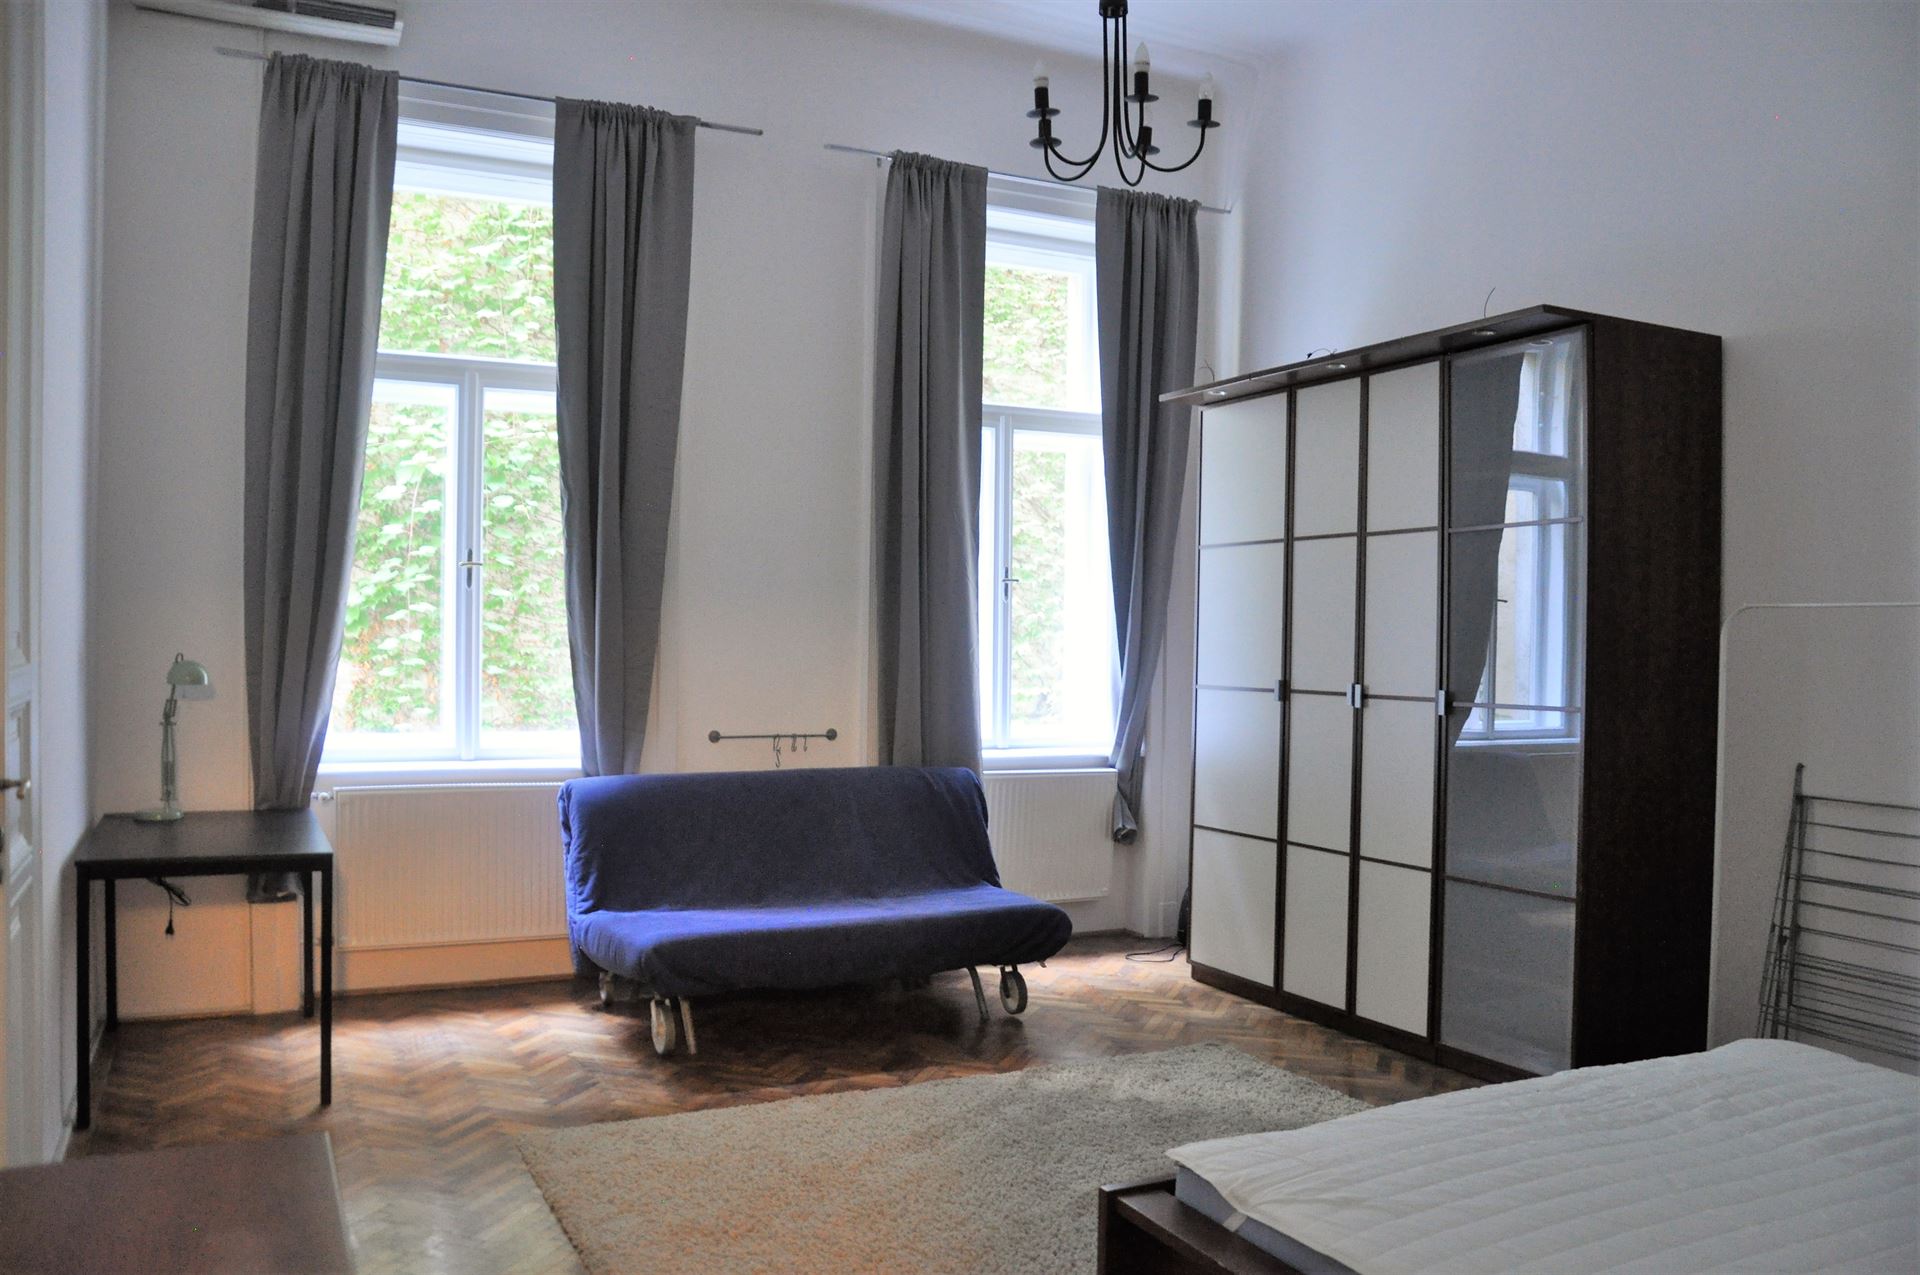 budapest-apartment-for-sale-near-kalvin-district-5-investment-property-for-sale-real-estate-budapest-downtown5